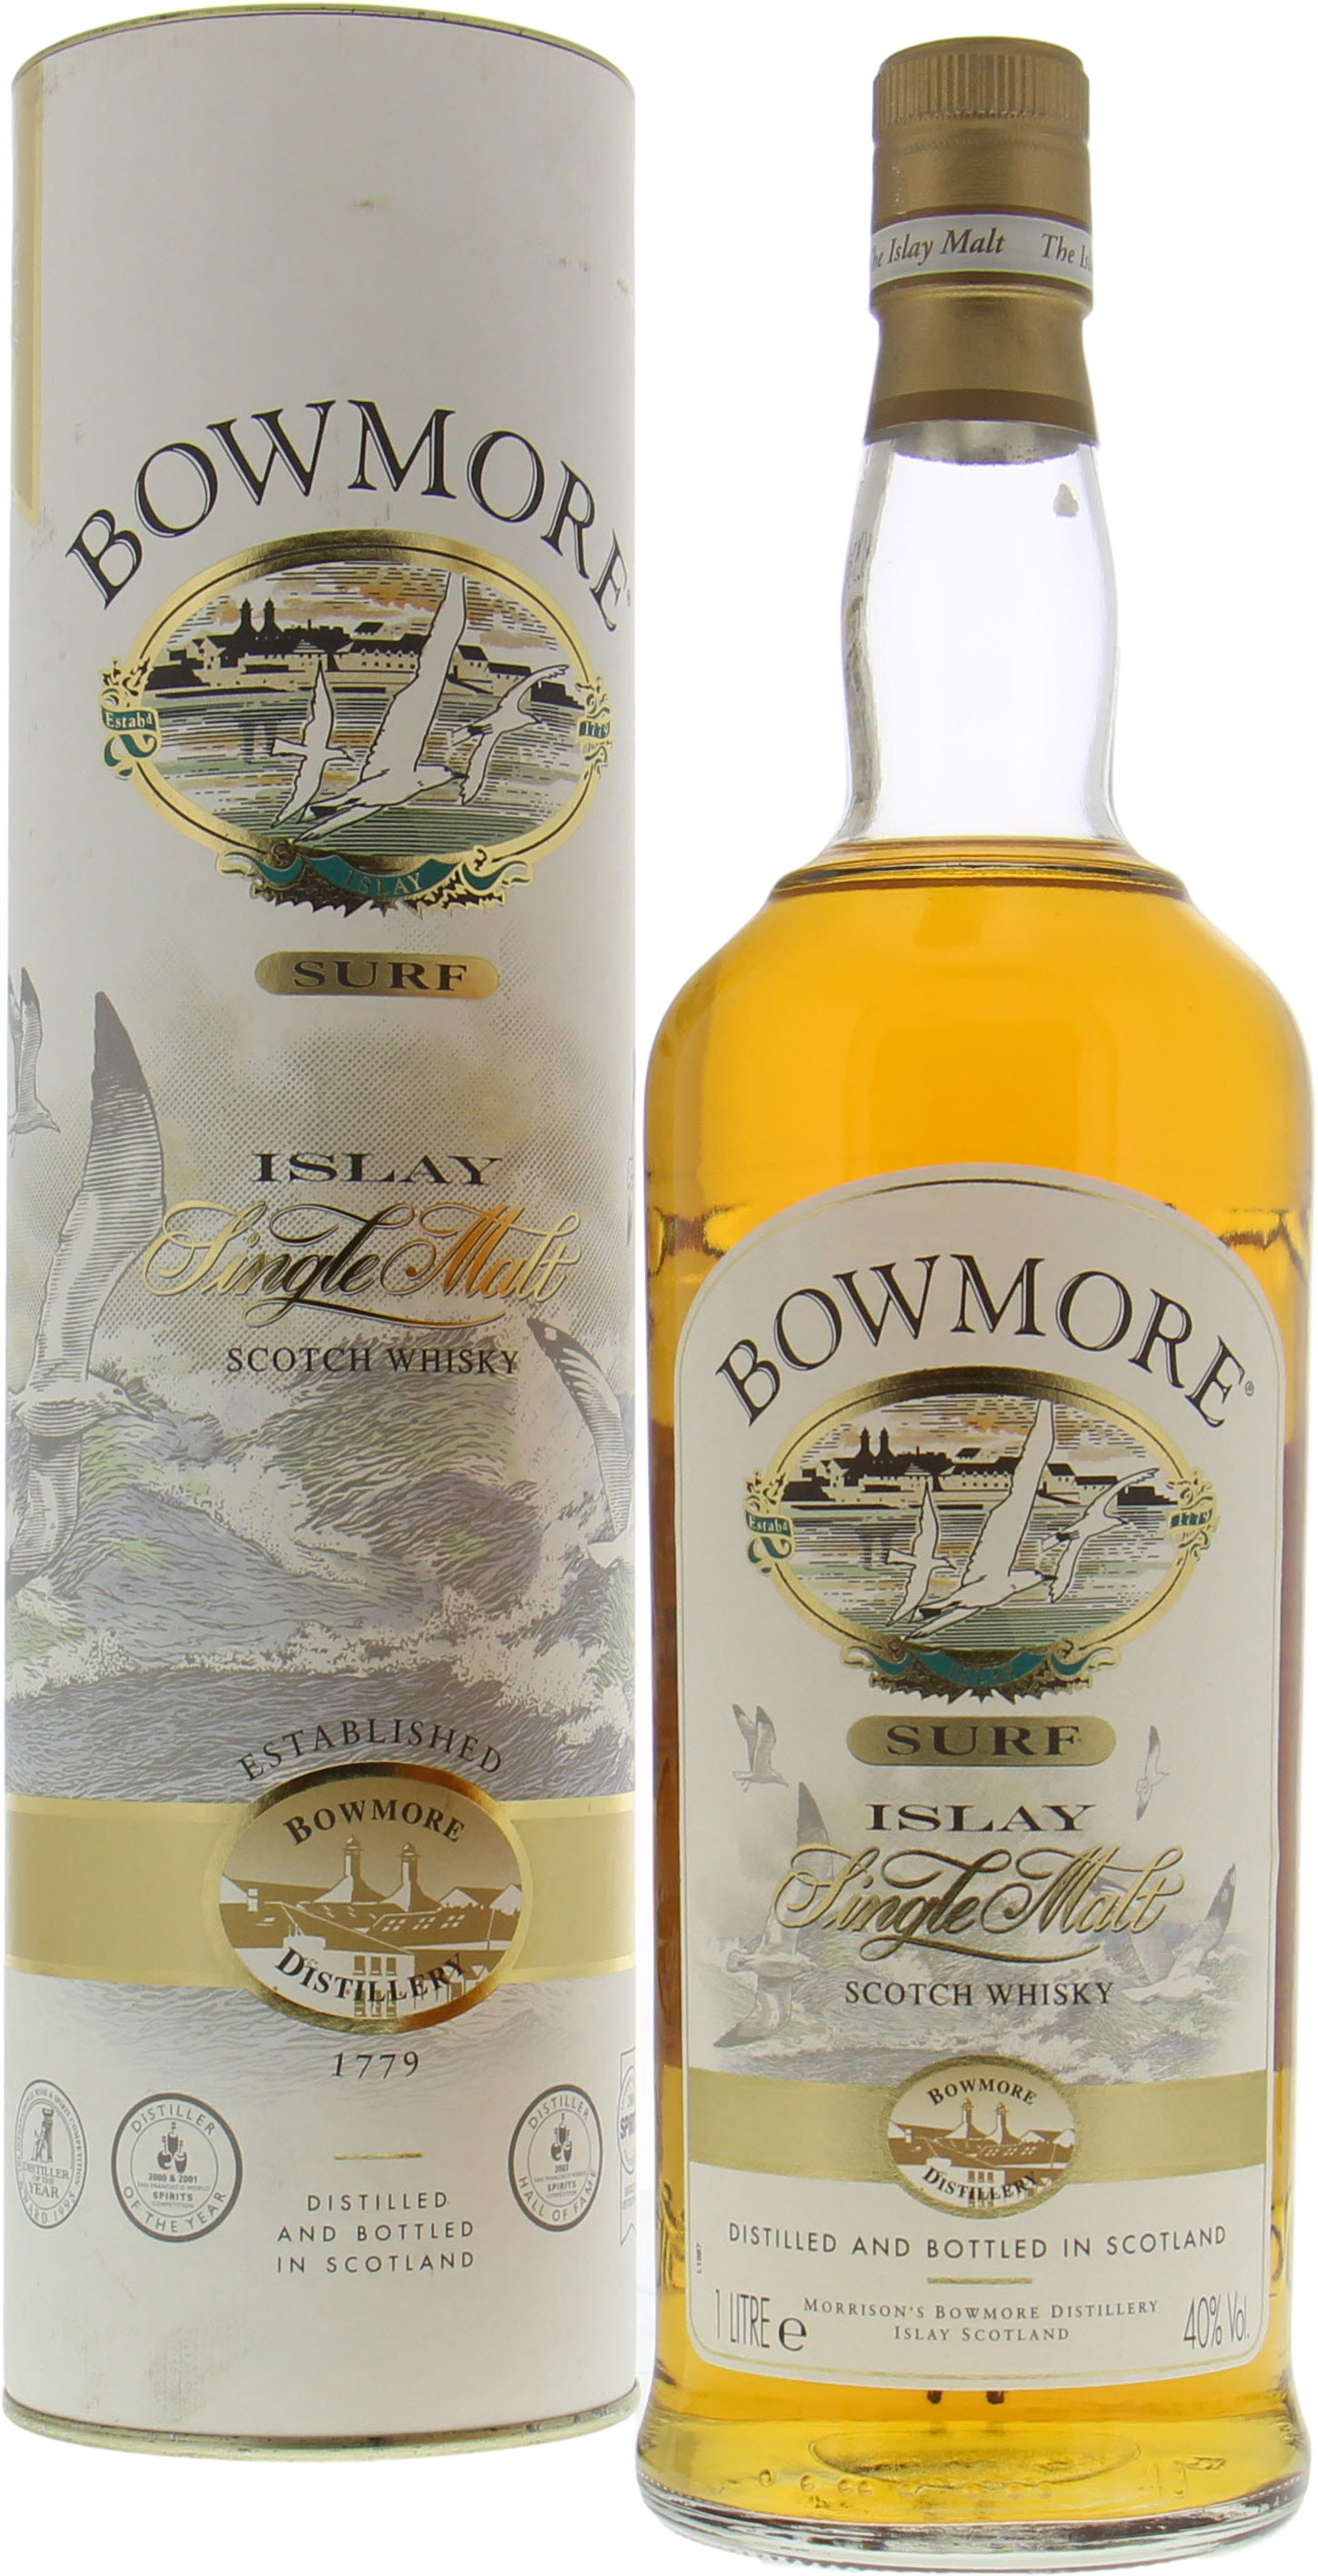 Bowmore - Surf Golden label with small distillery image 40% NV